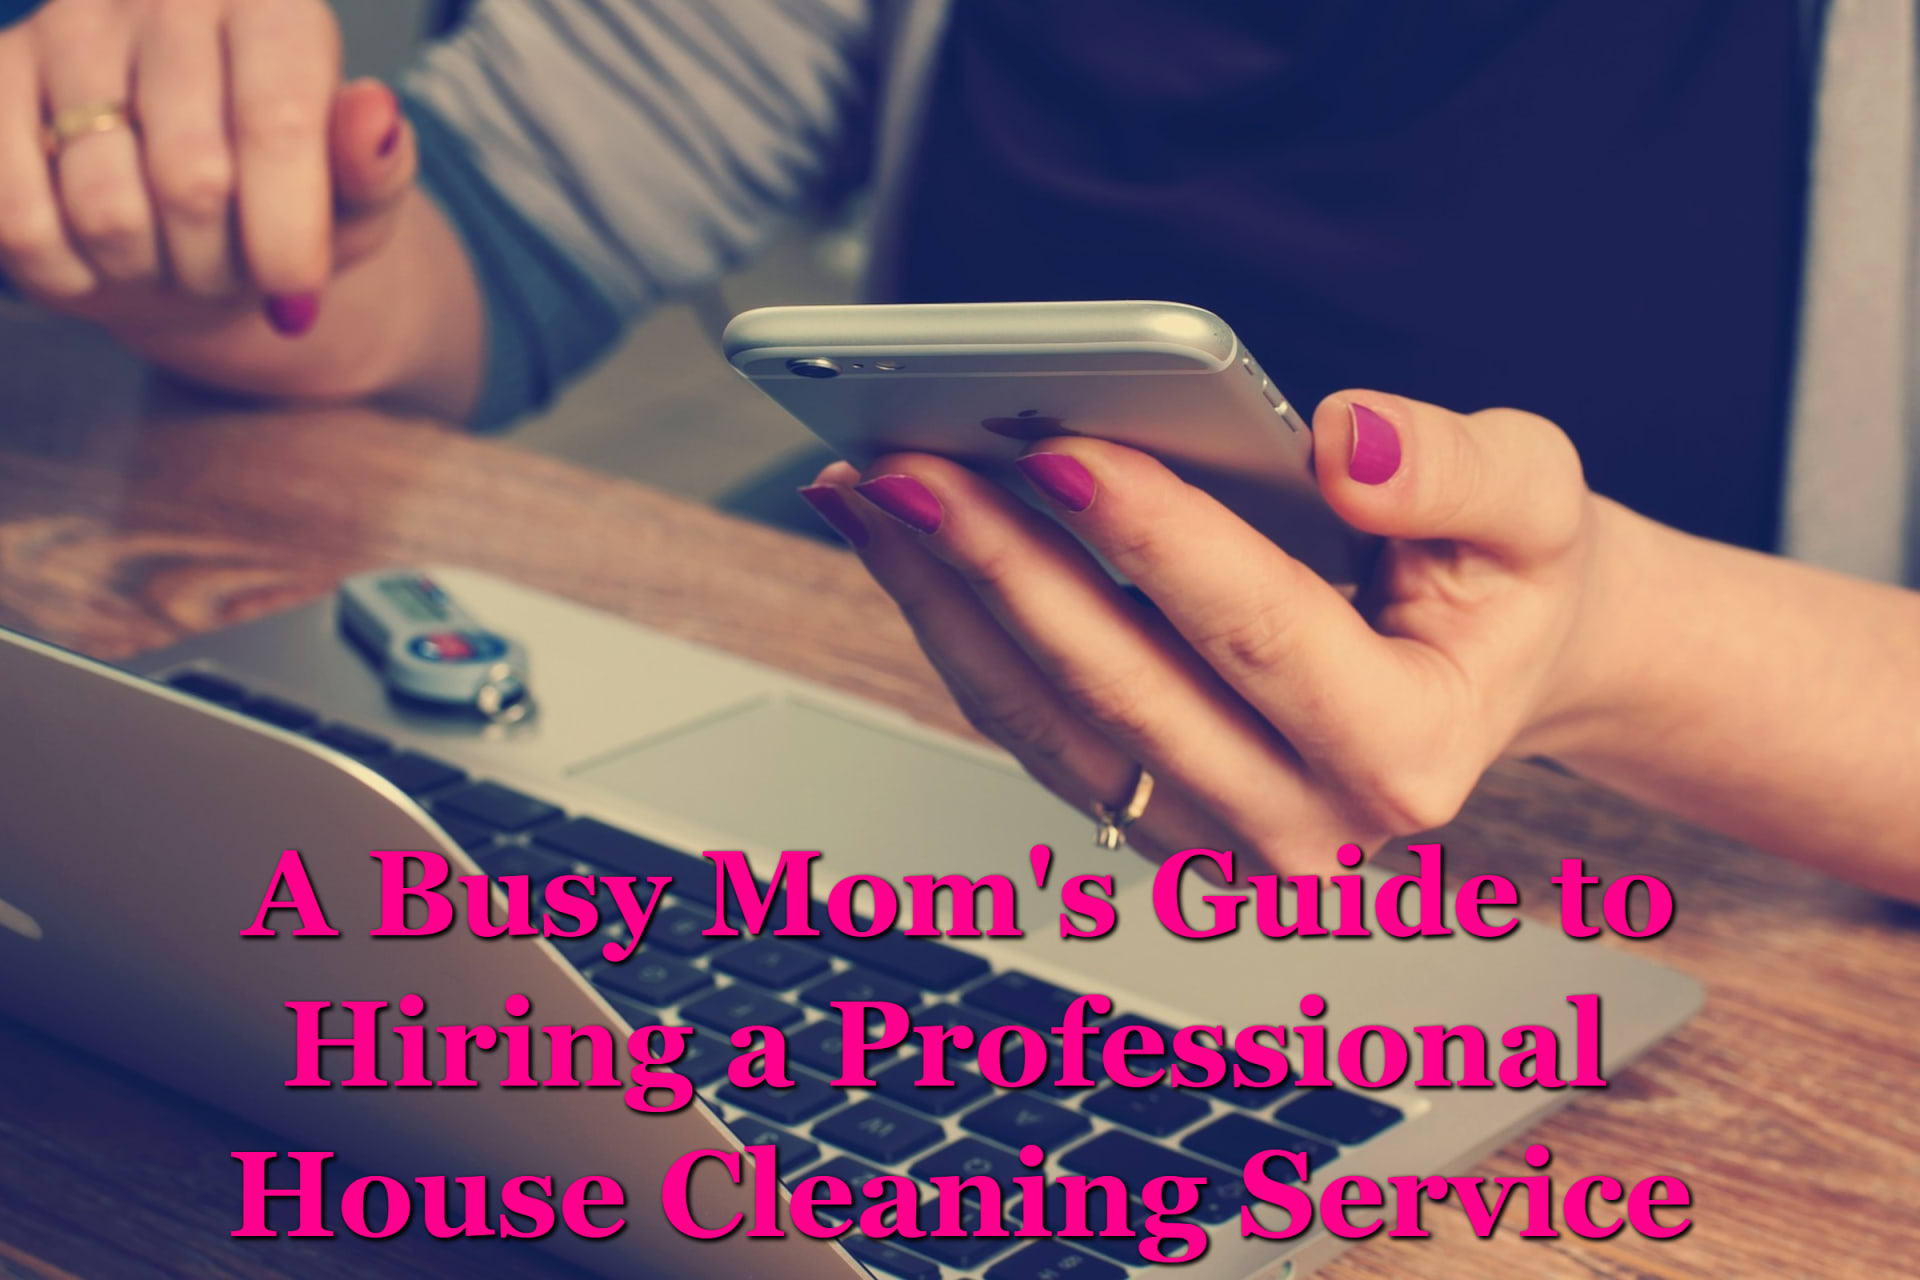 A Busy Mom’s Guide to Hiring a Professional House Cleaning Service